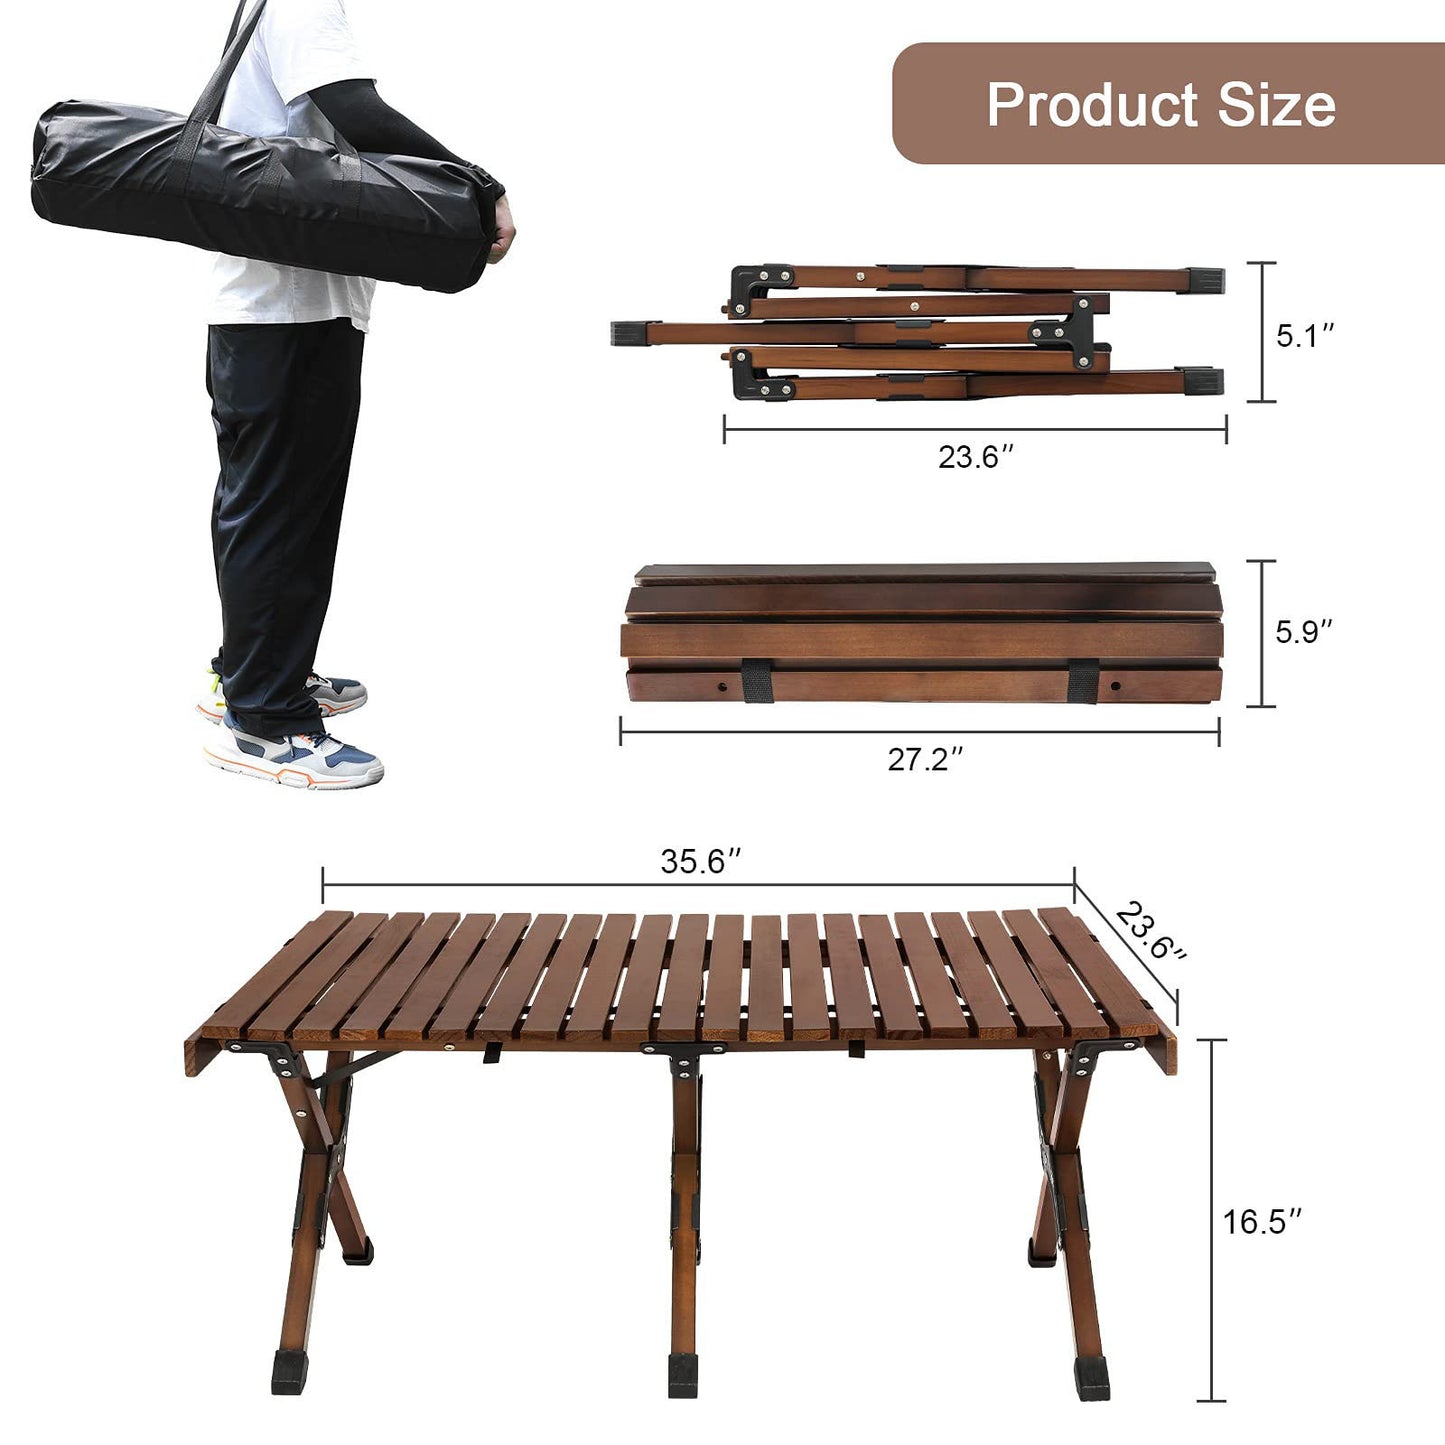 Camping Table, Wooden Folding Picnic Table in a Carry Bag